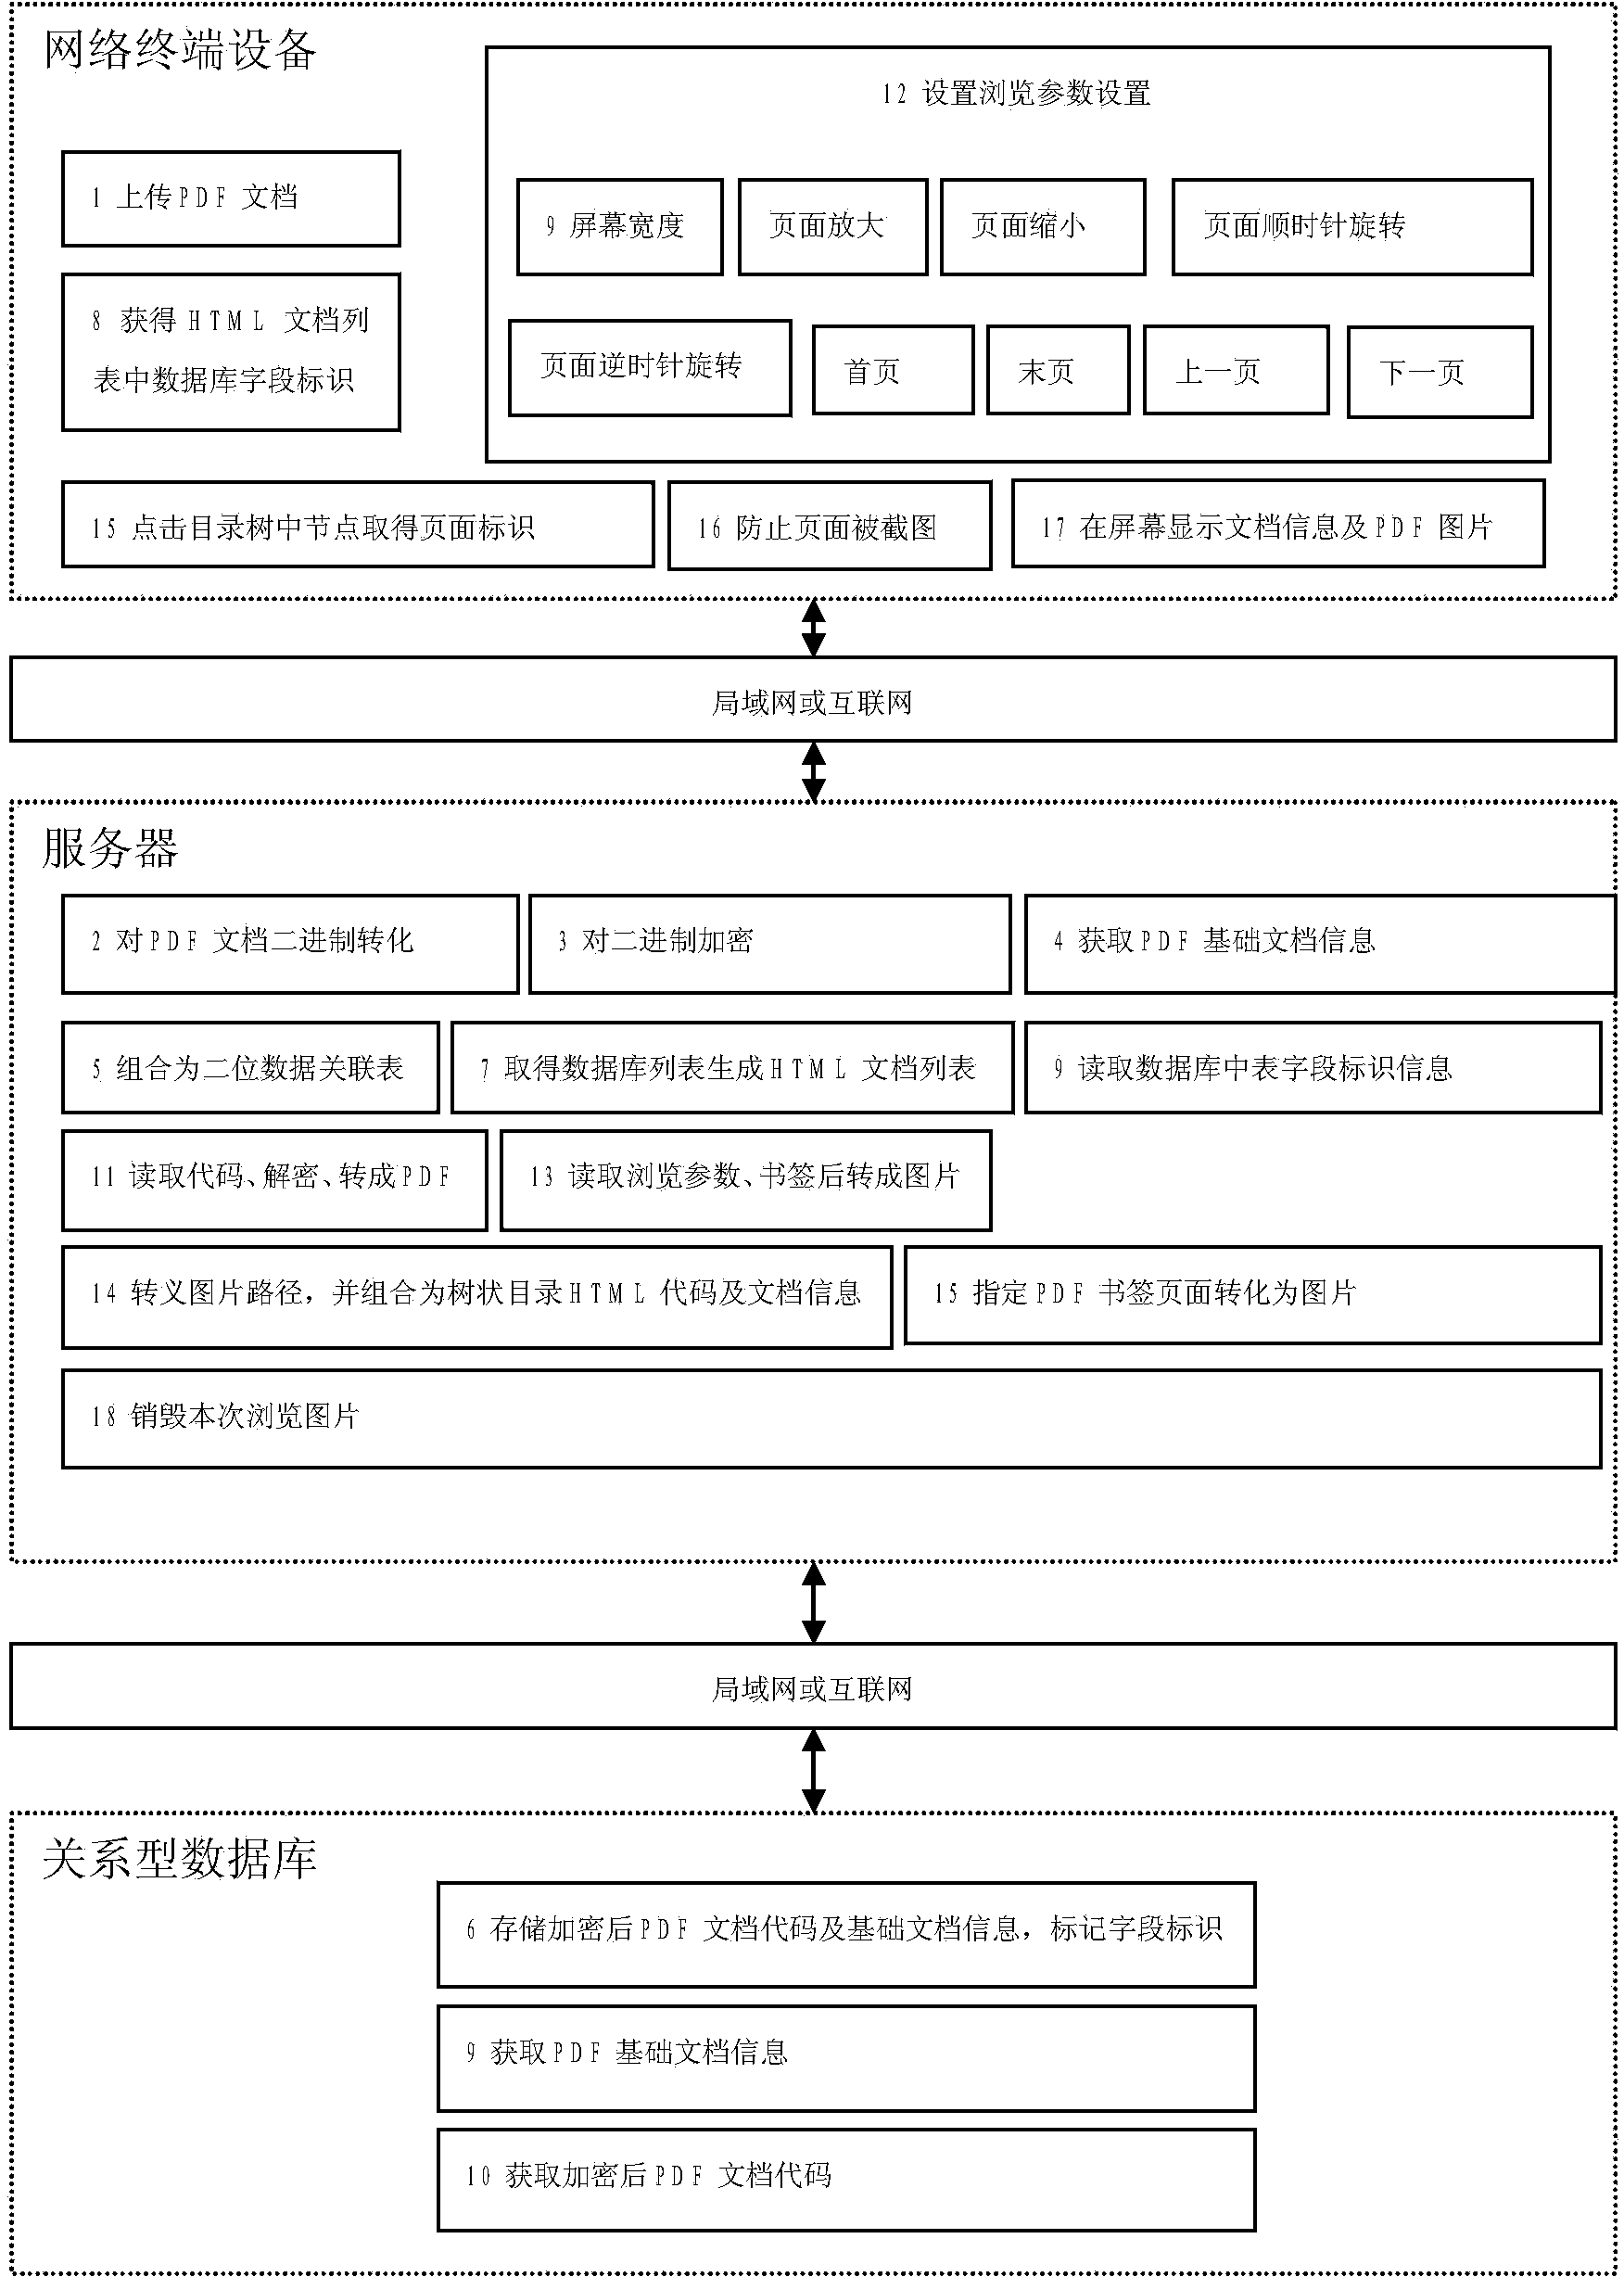 Relational-database-based online and controllable browsing method for PDF document